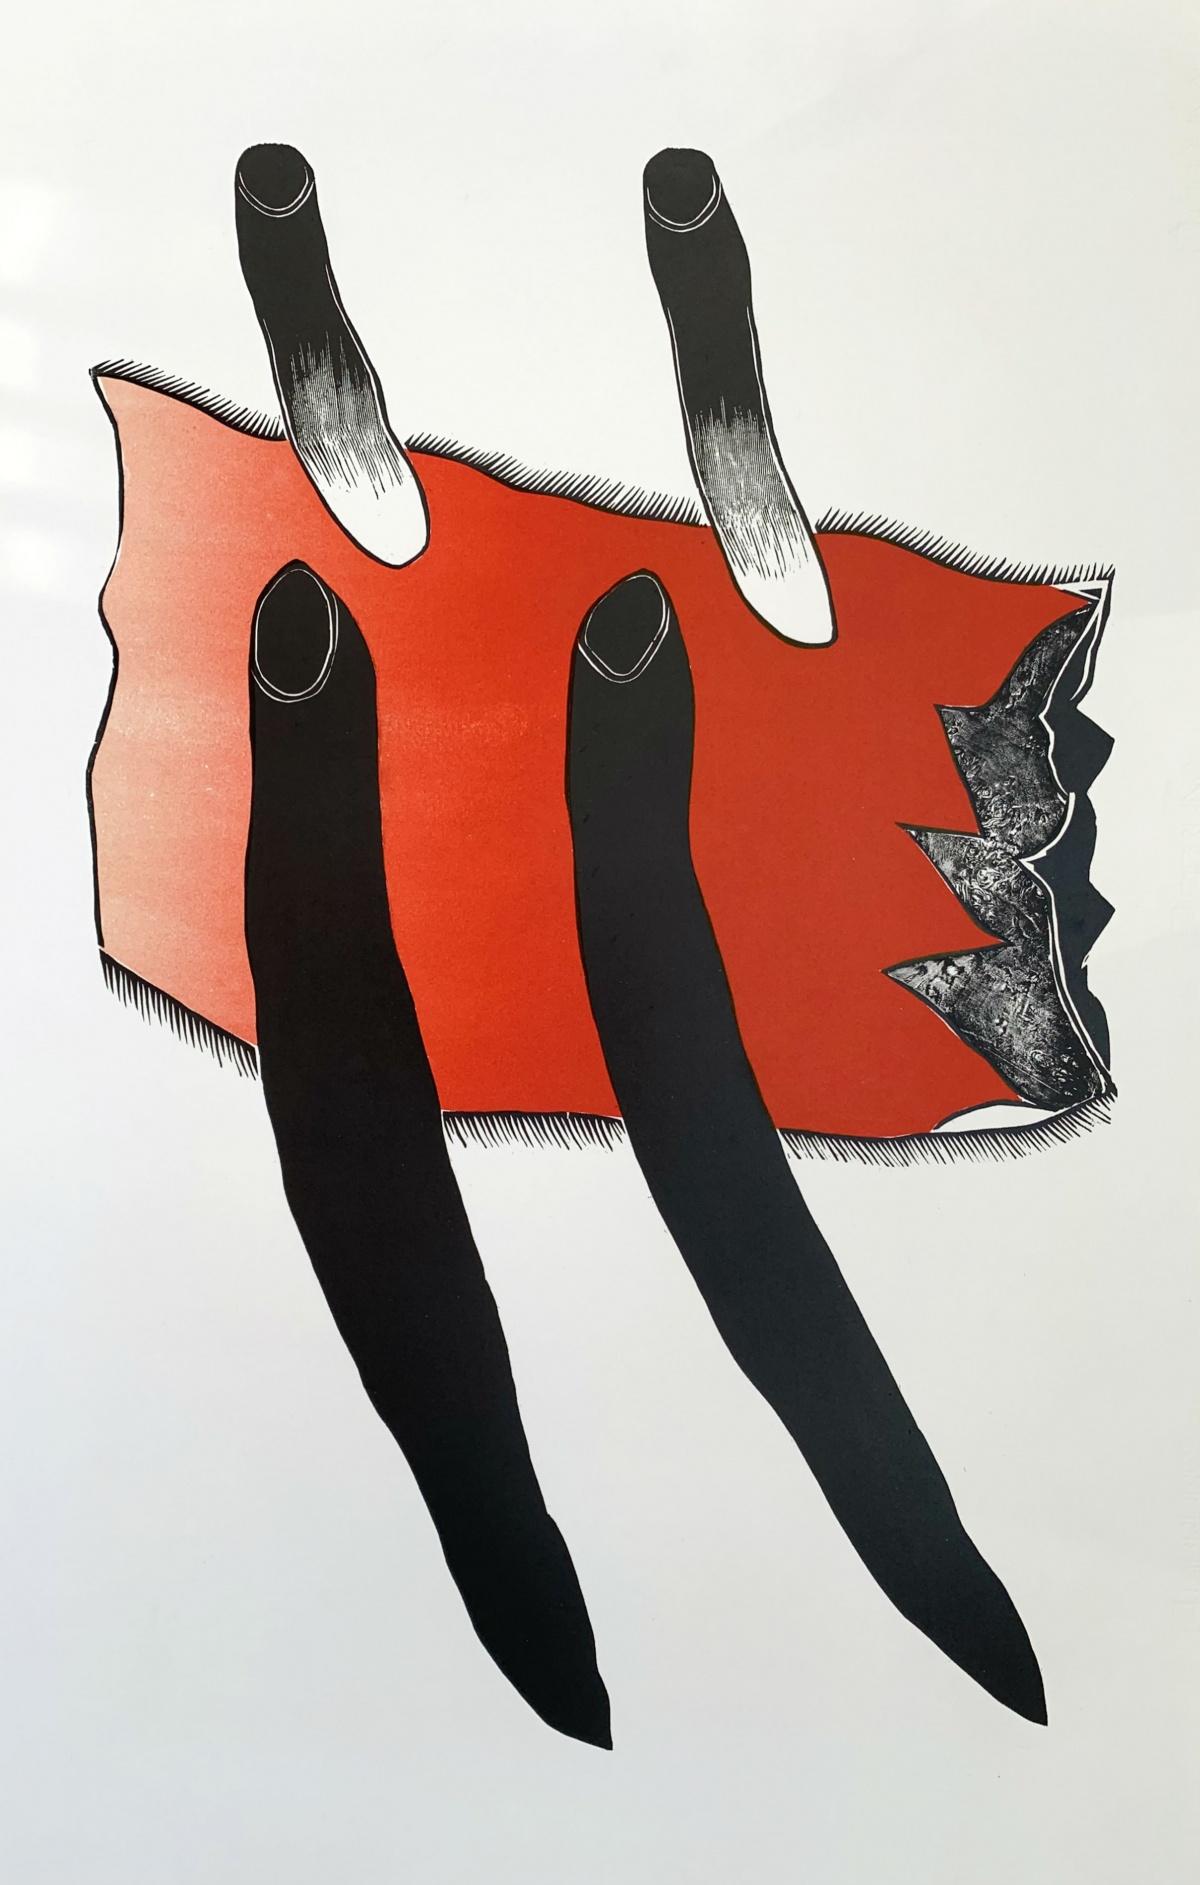 26 XII - XXI Century abstraction woodcut print, Red black & white